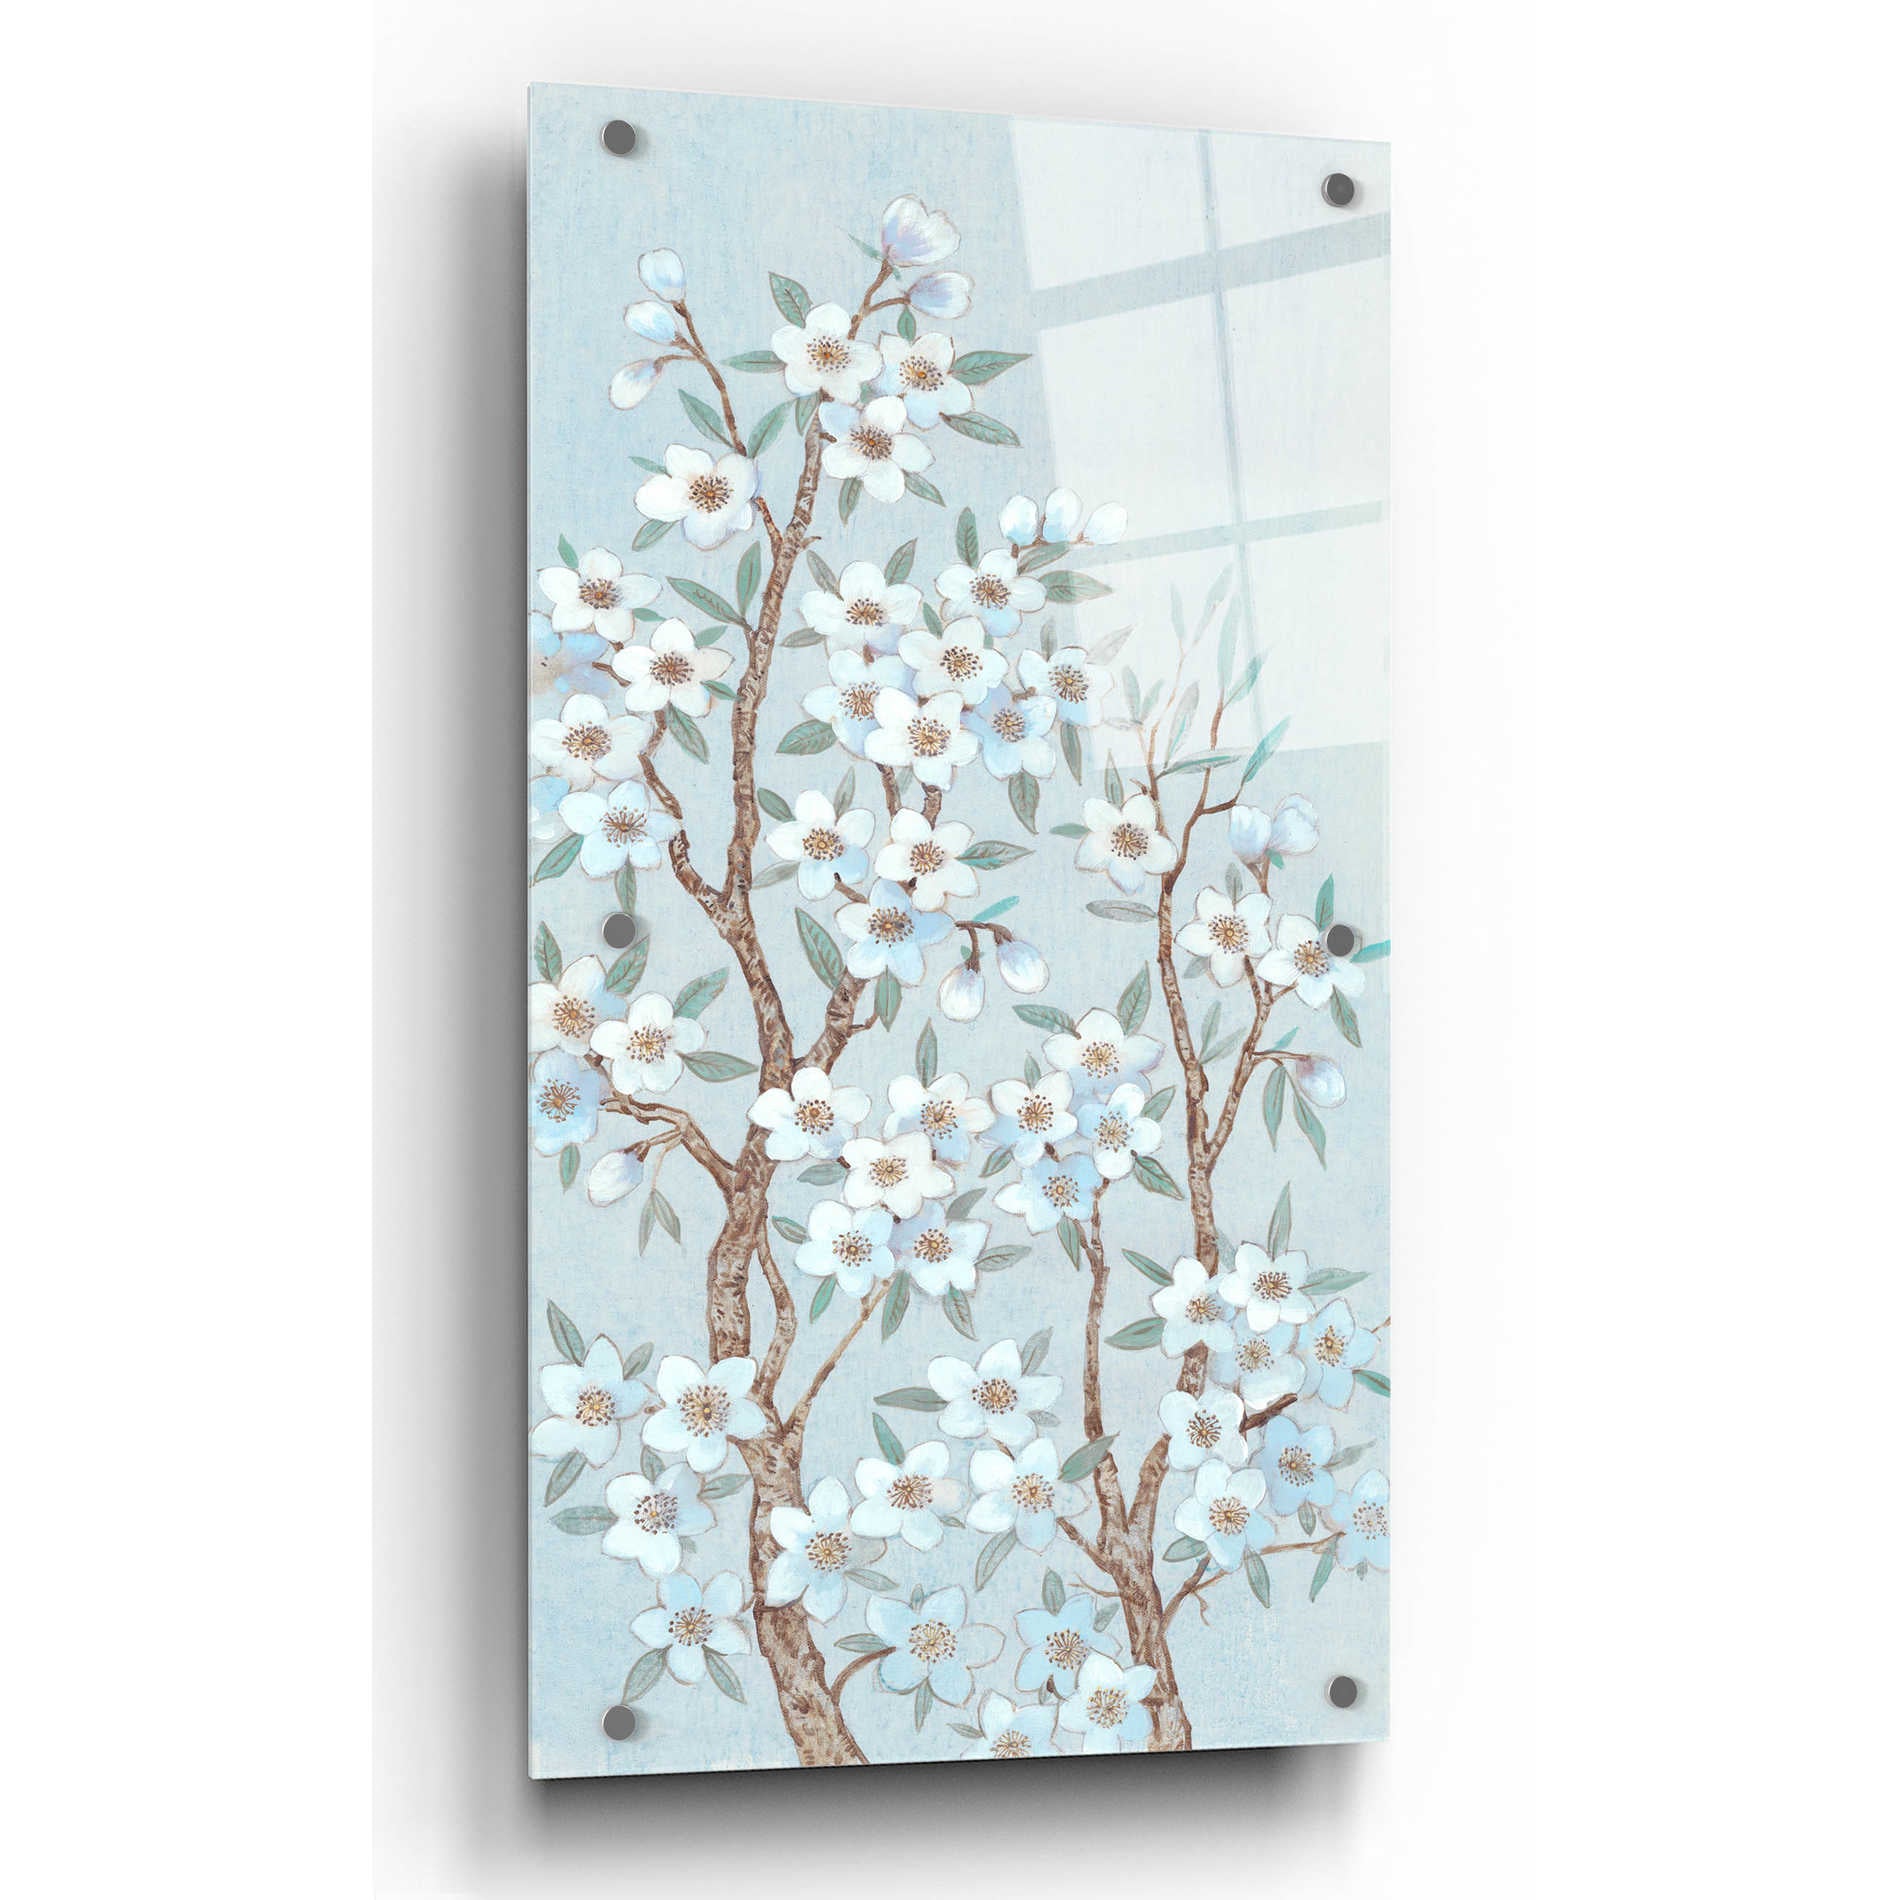 Epic Art 'Branches of Blossoms II' by Tim O'Toole, Acrylic Glass Wall Art,12x24